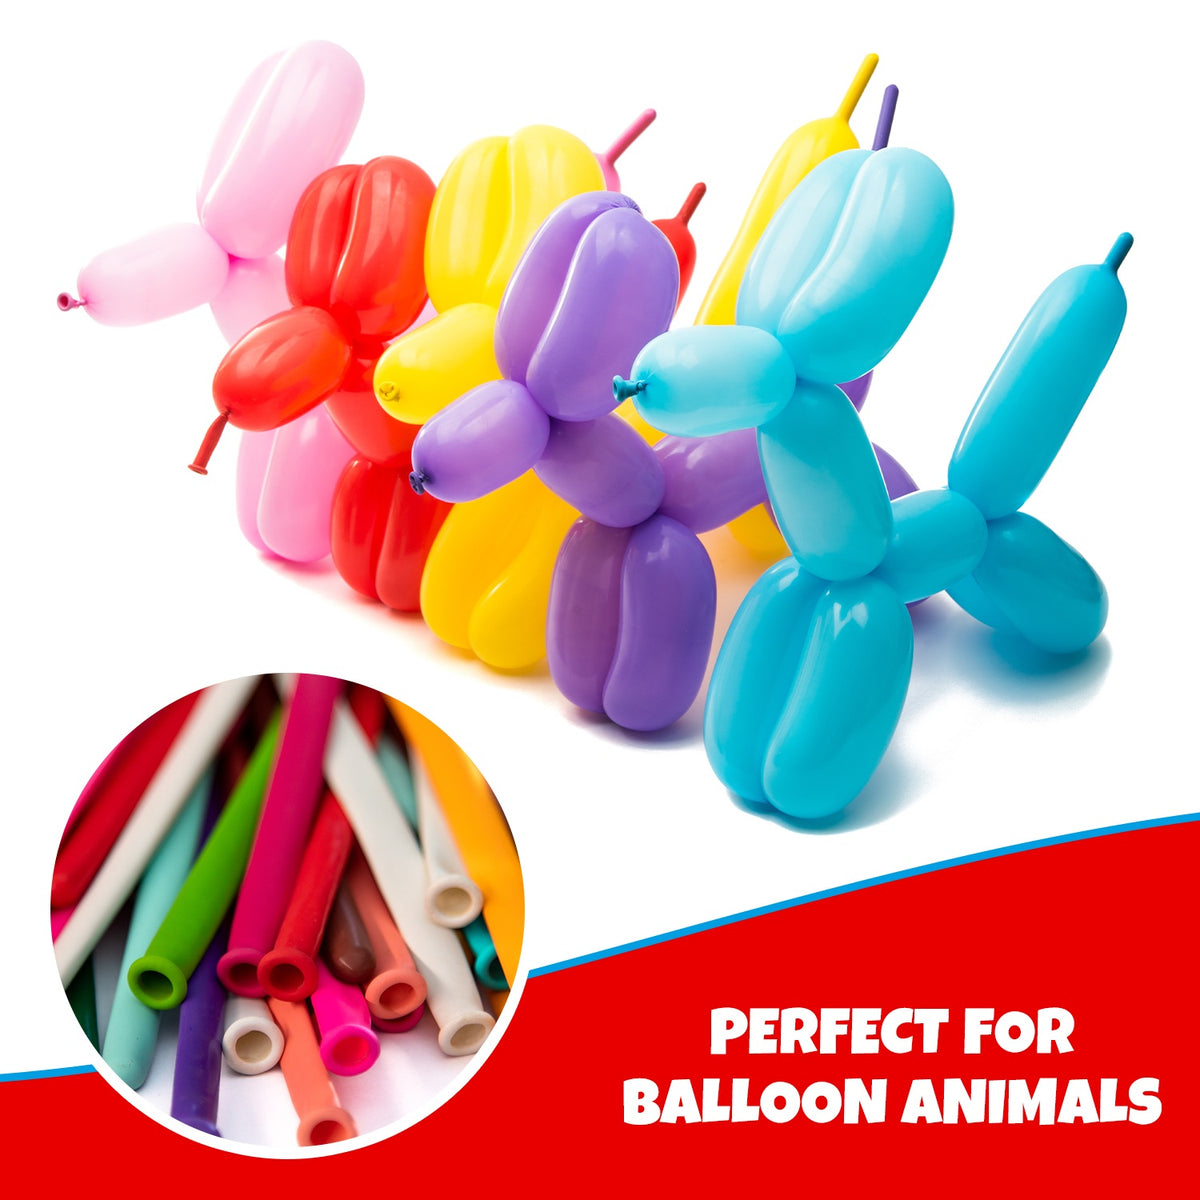 Clownatex 260 Twisting Balloons - Assorted Party Pack (100/bag)